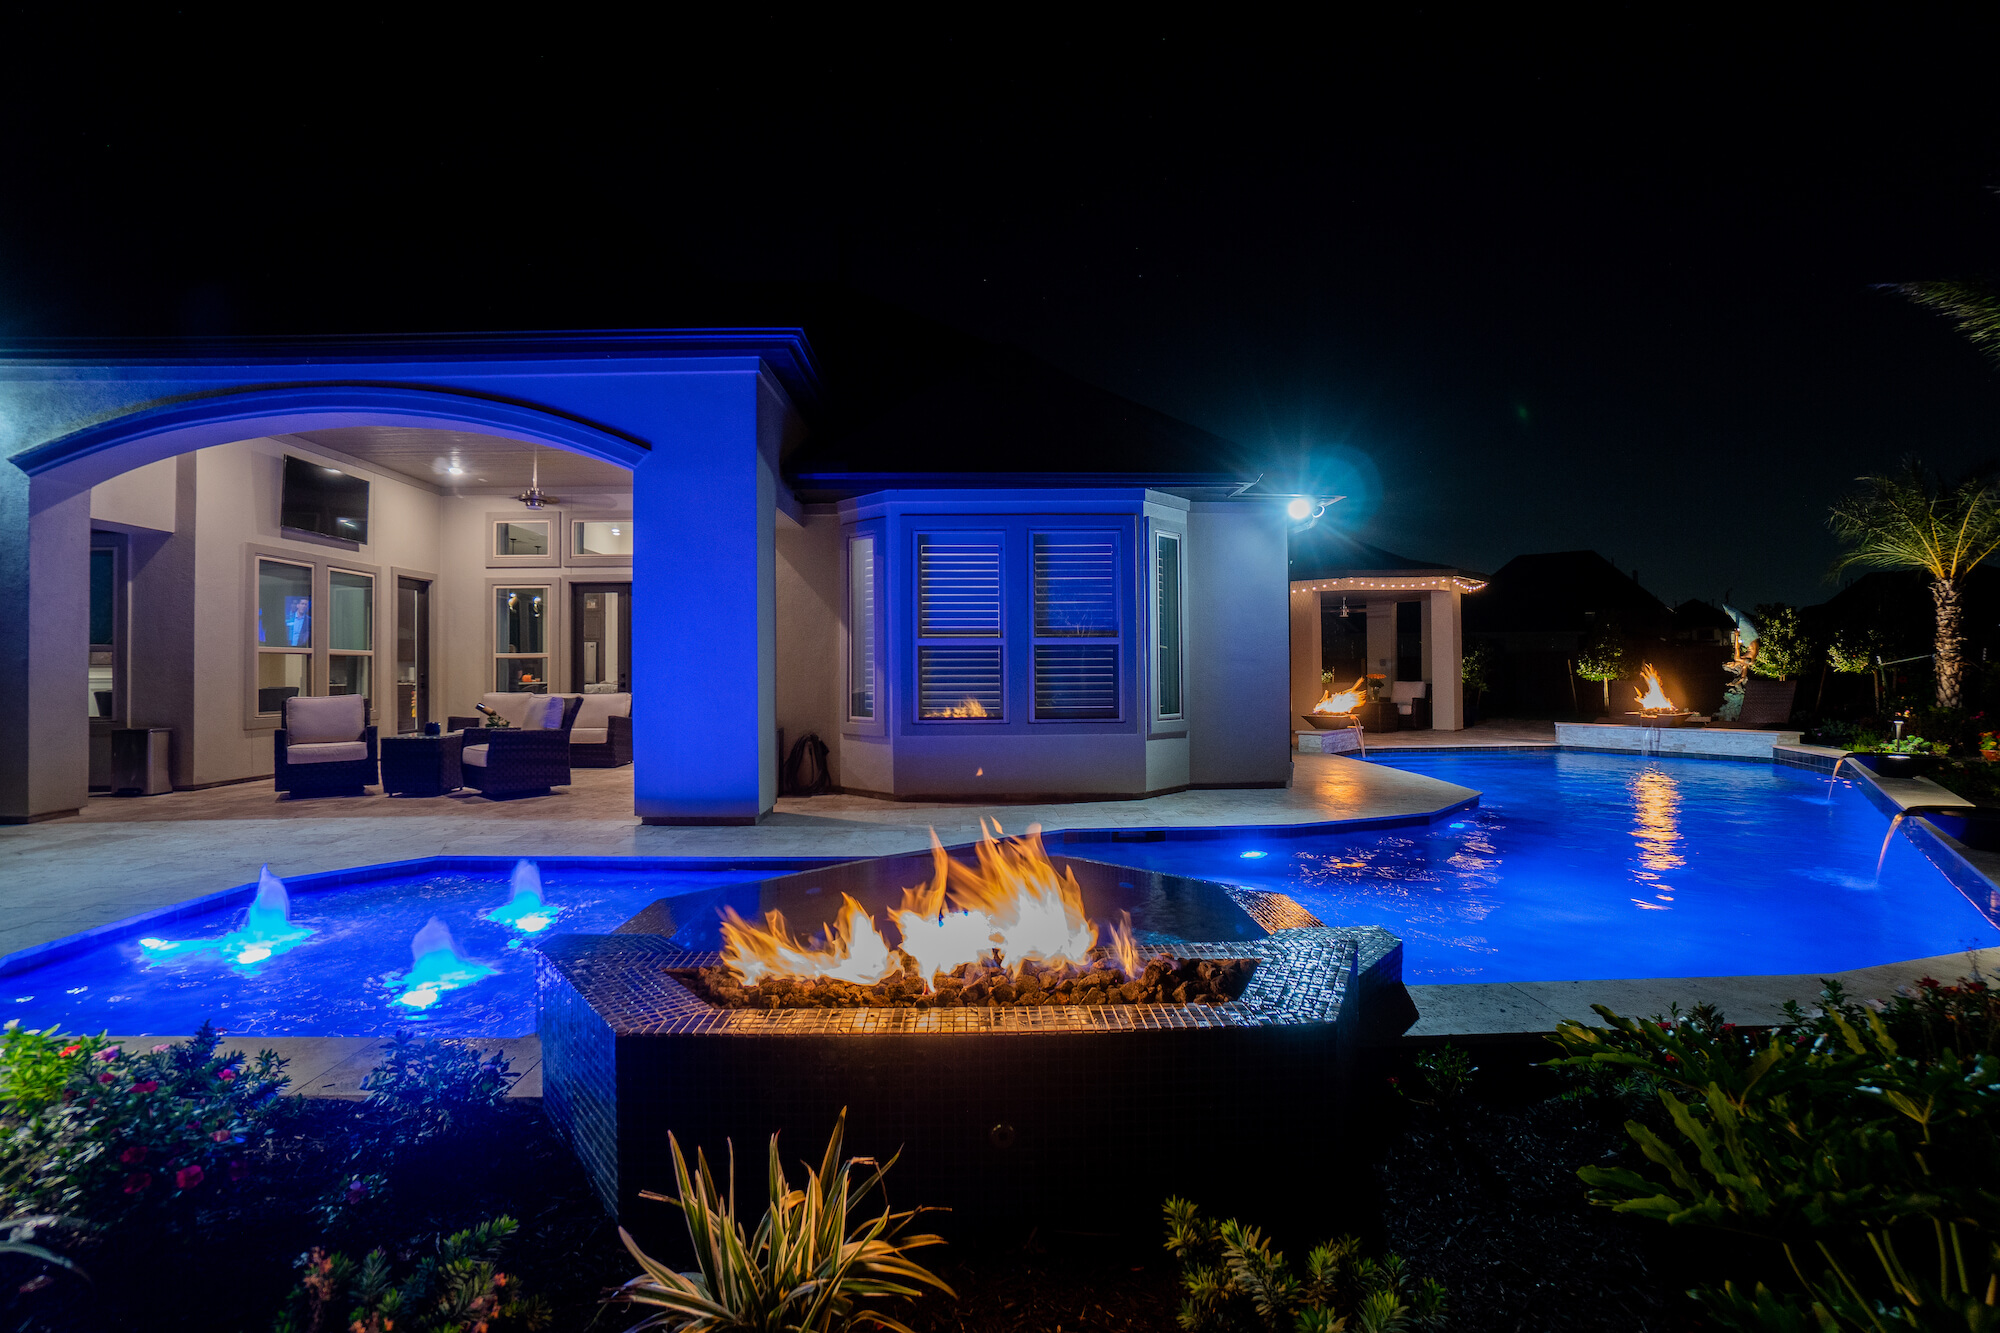 Outdoor Living - Houston - Pool and spa area lit up at night